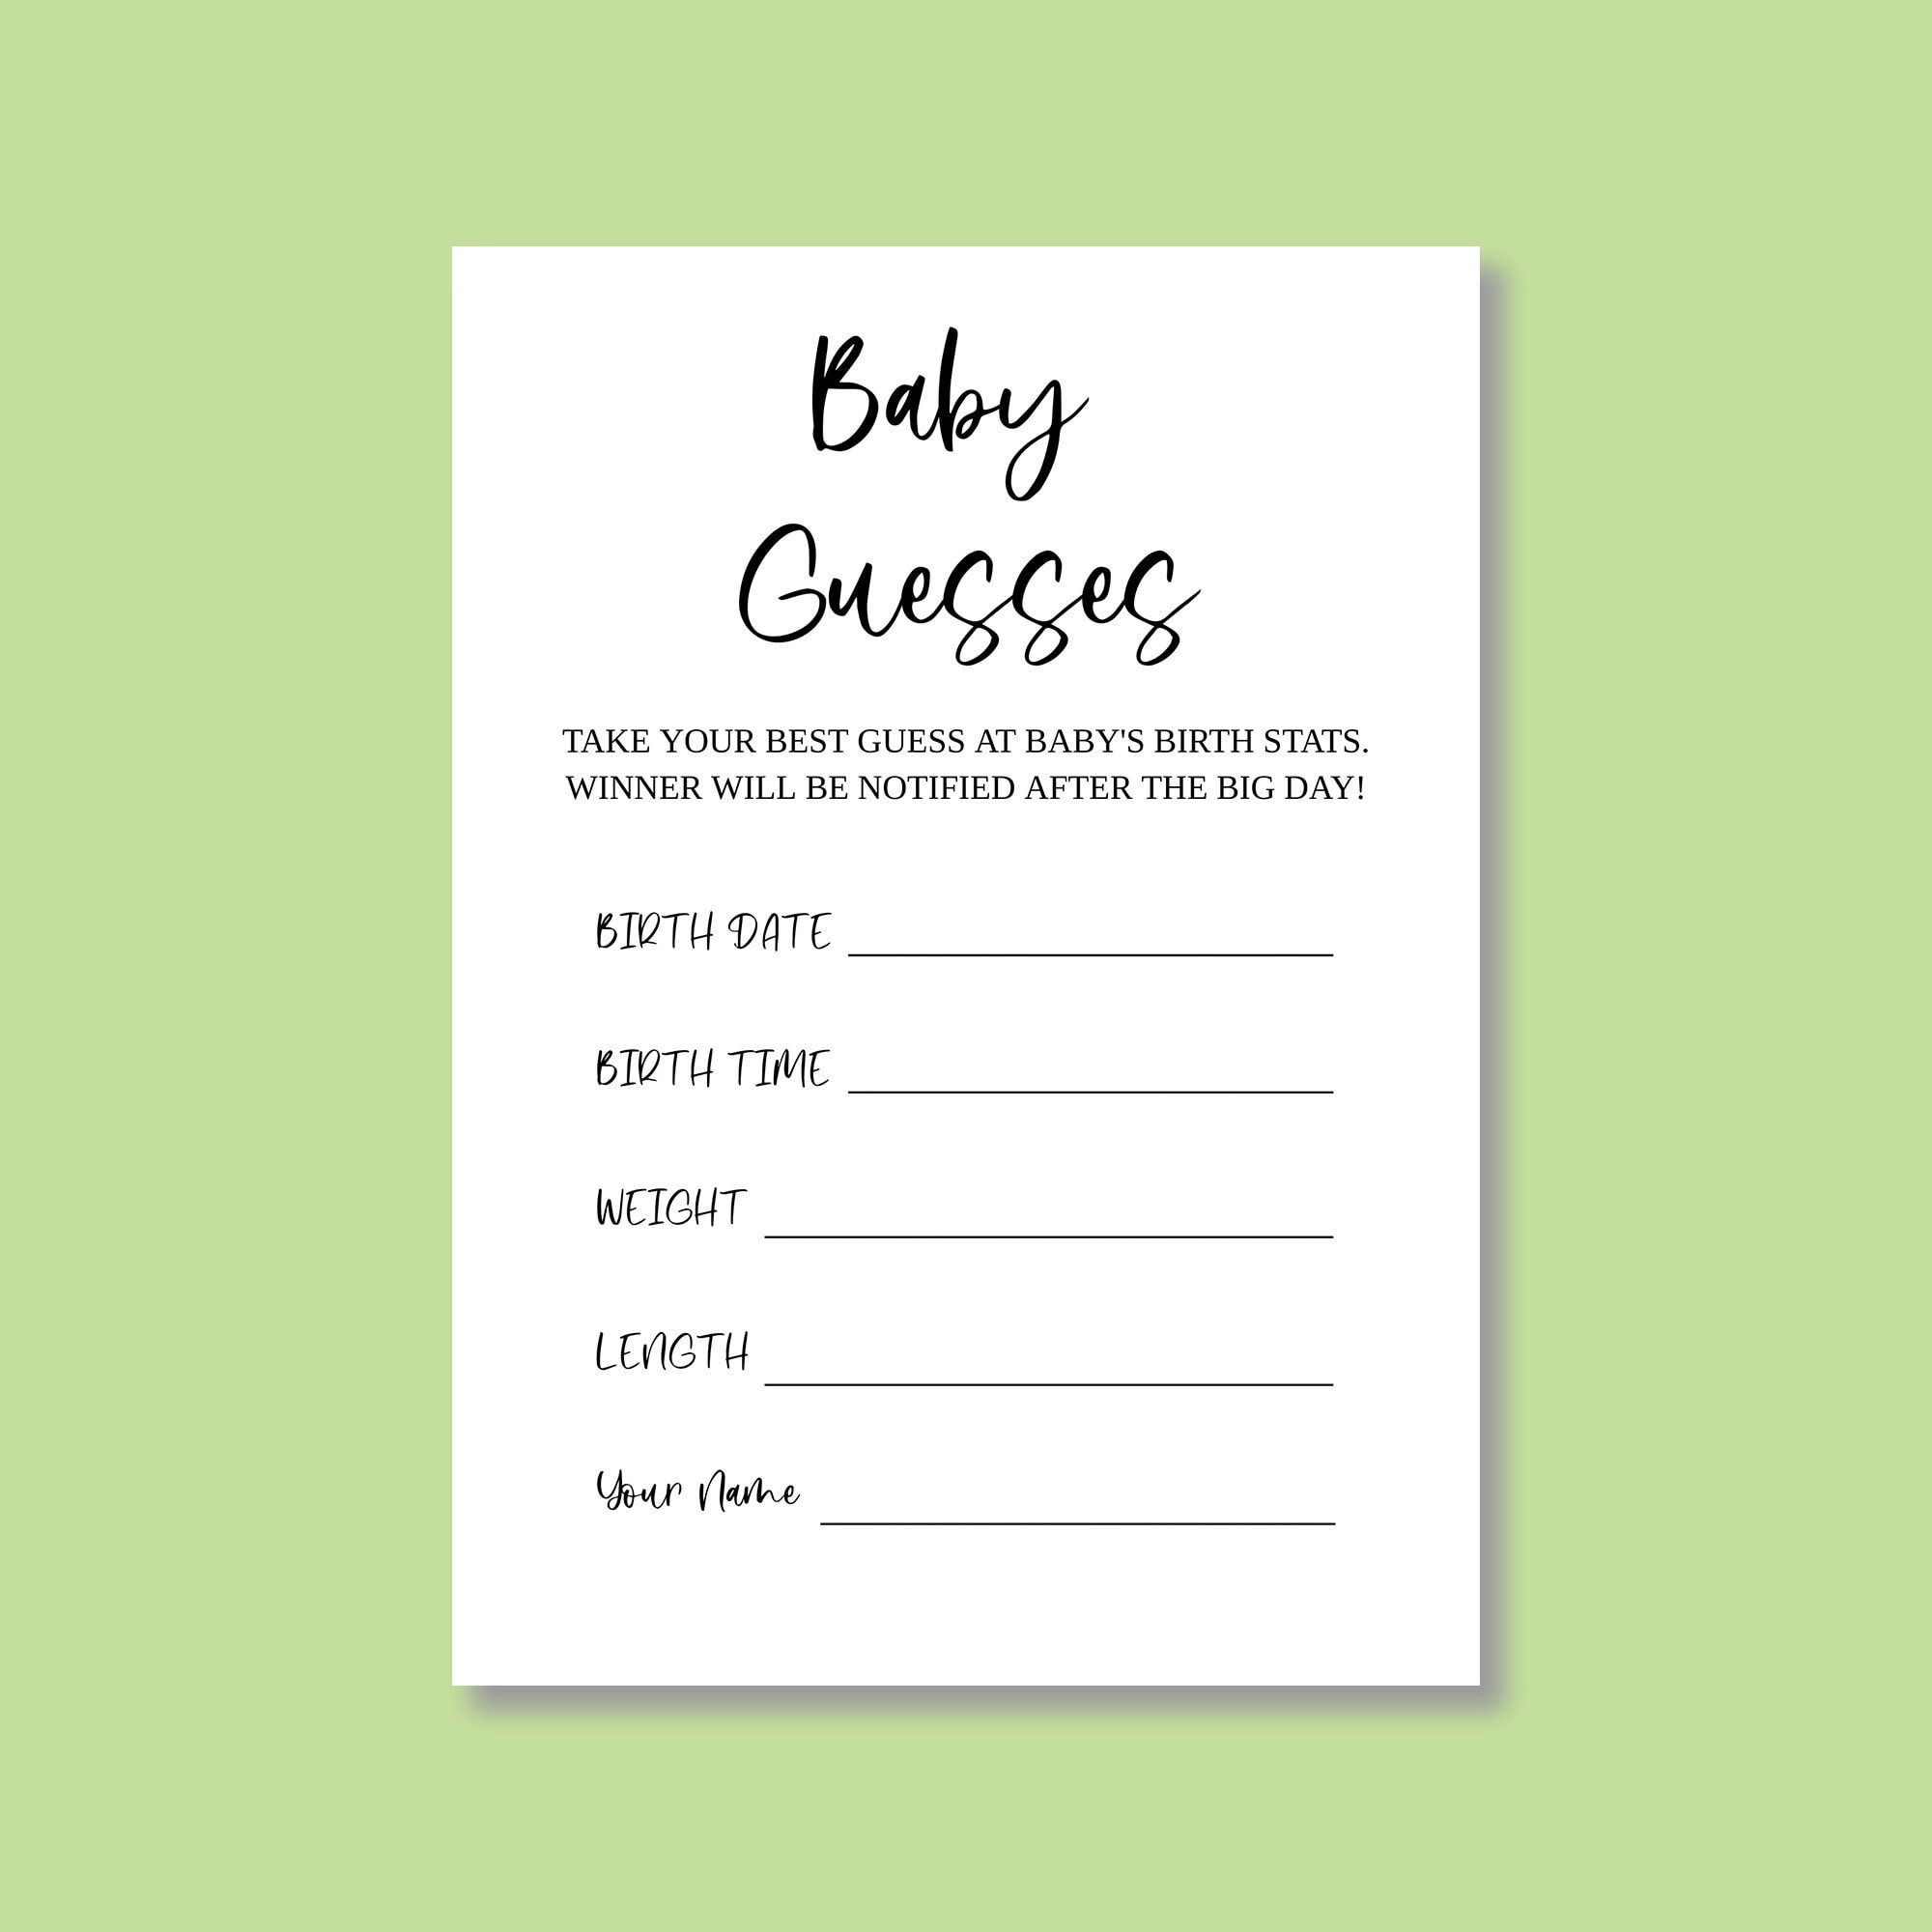 babies due date guess large print out 48